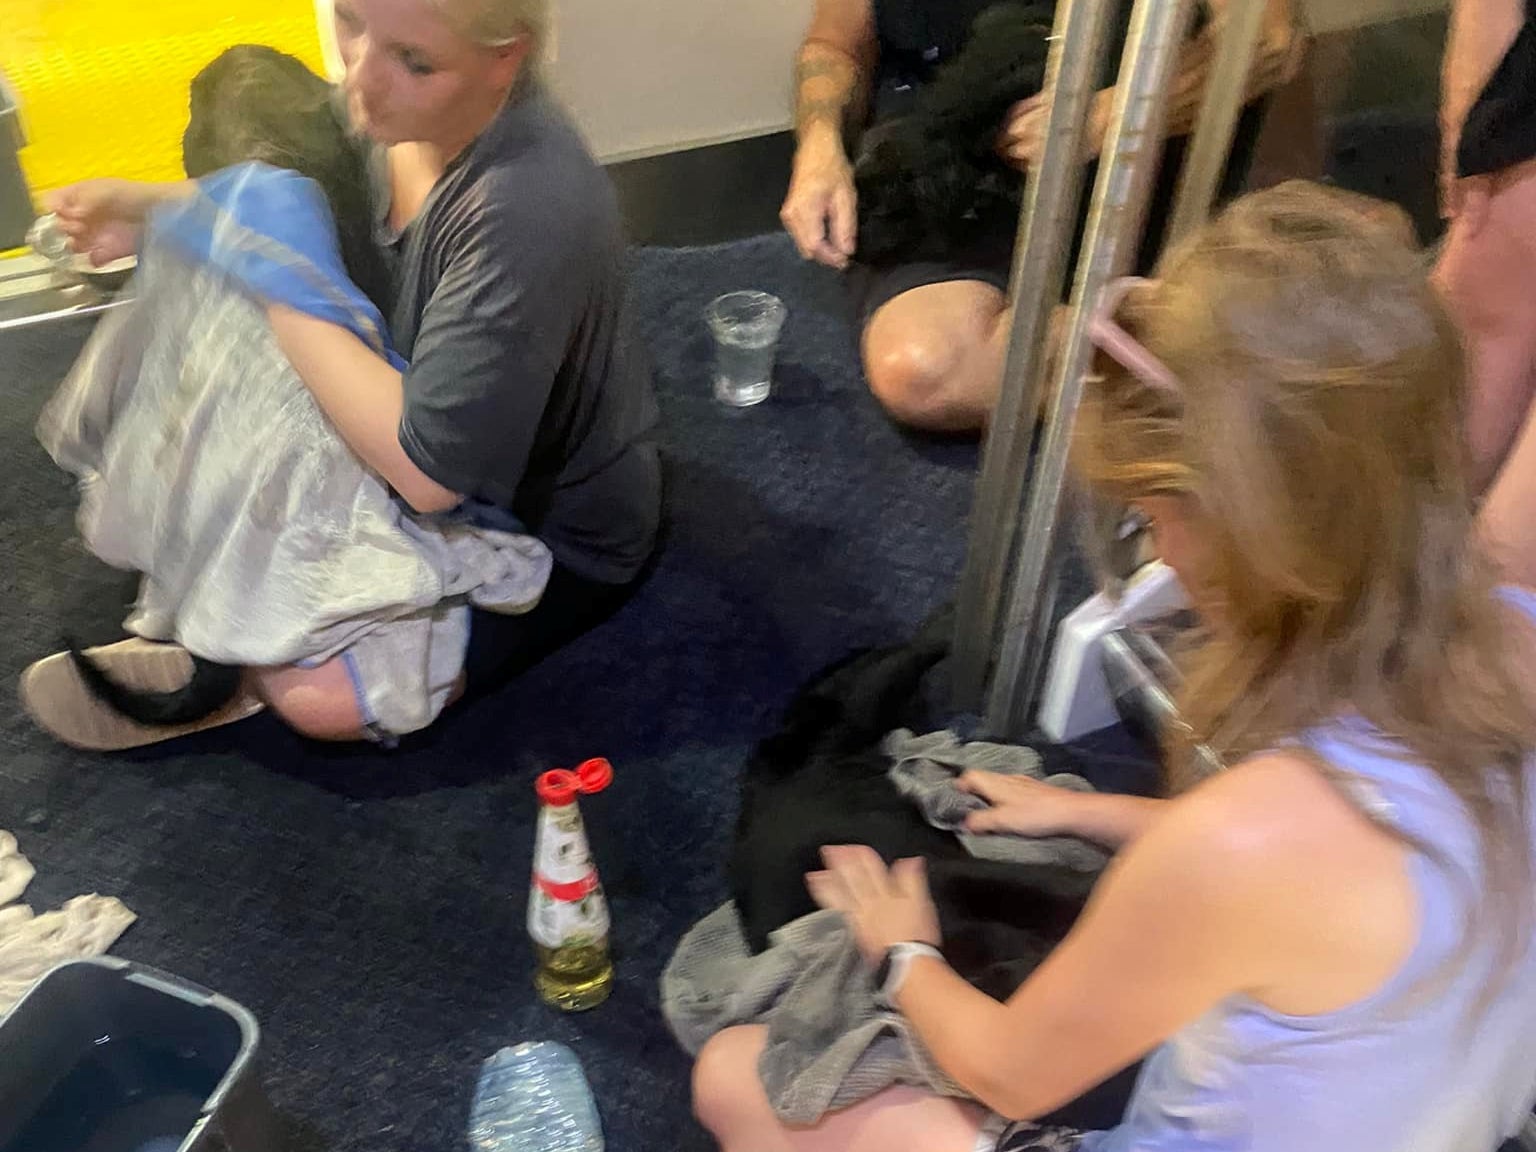 Passengers used damp towels to help cool down the animals